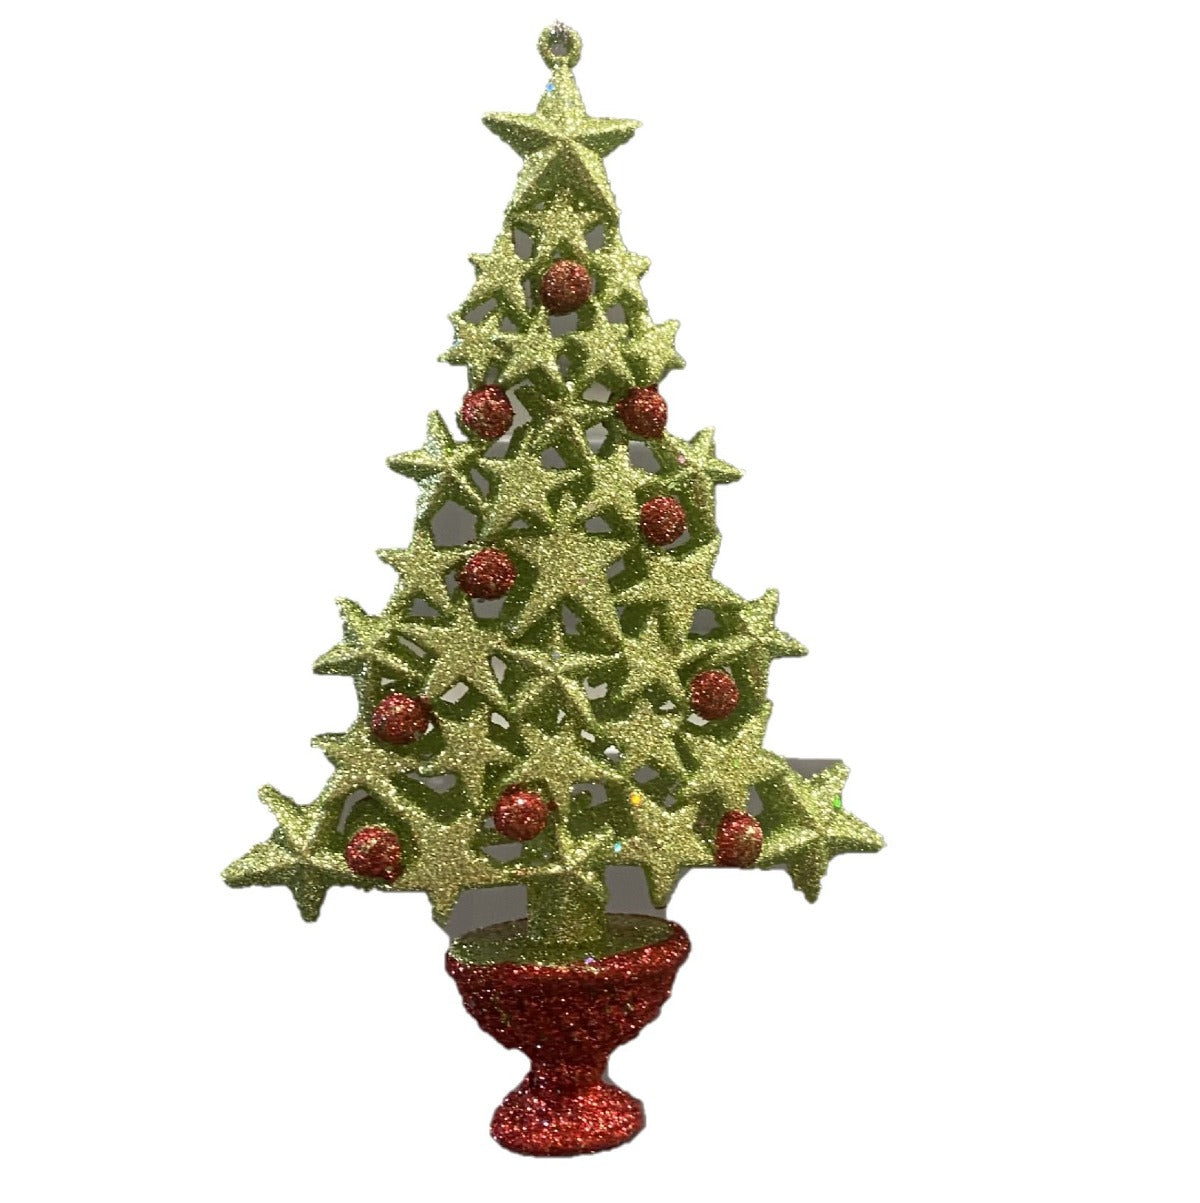 Gisela Graham Christmas Tree Hanging Ornament  This beautifully festive Christmas Tree Hanging Ornament from Gisela Graham is the perfect way to add a touch of glitter to your tree this Christmas